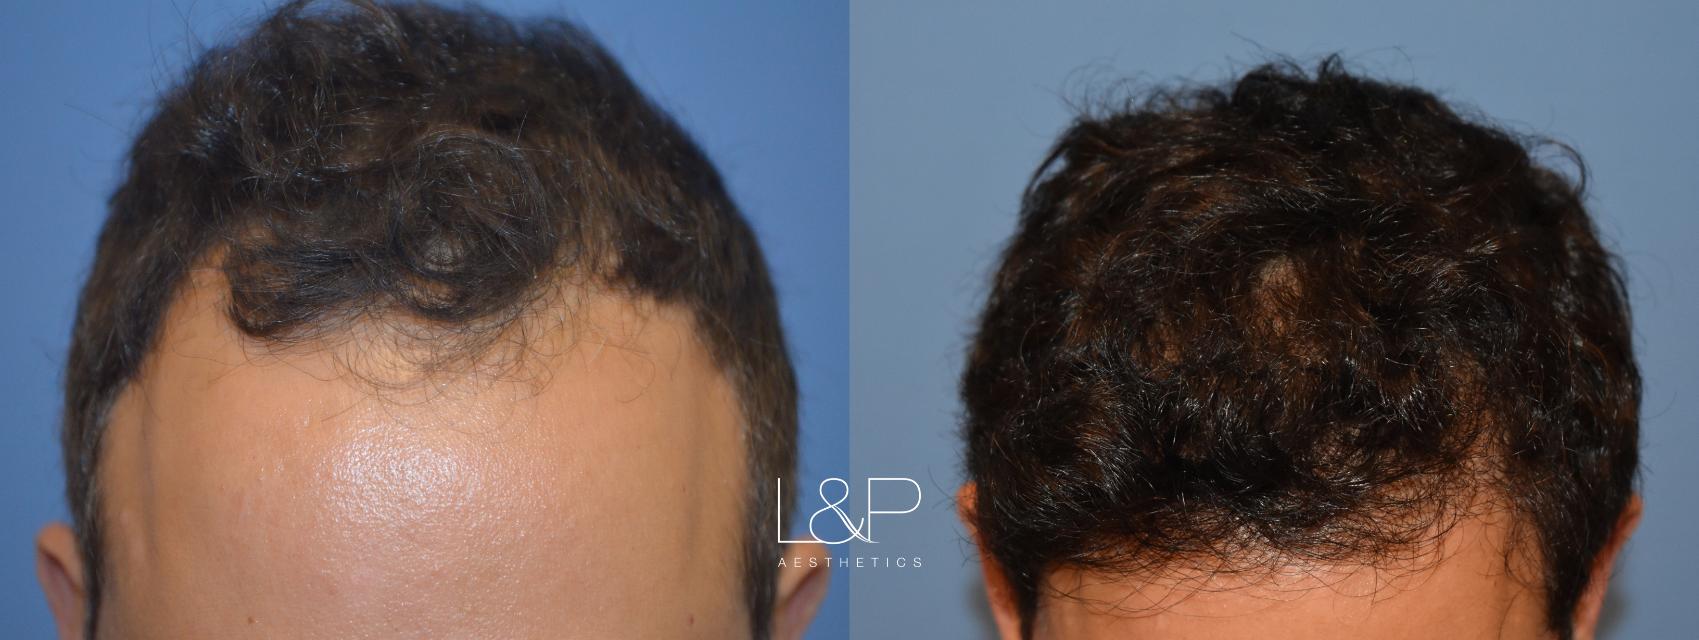 Hair Transplant For Man With Receding Hairline by Drs. Lieberman & Parikh